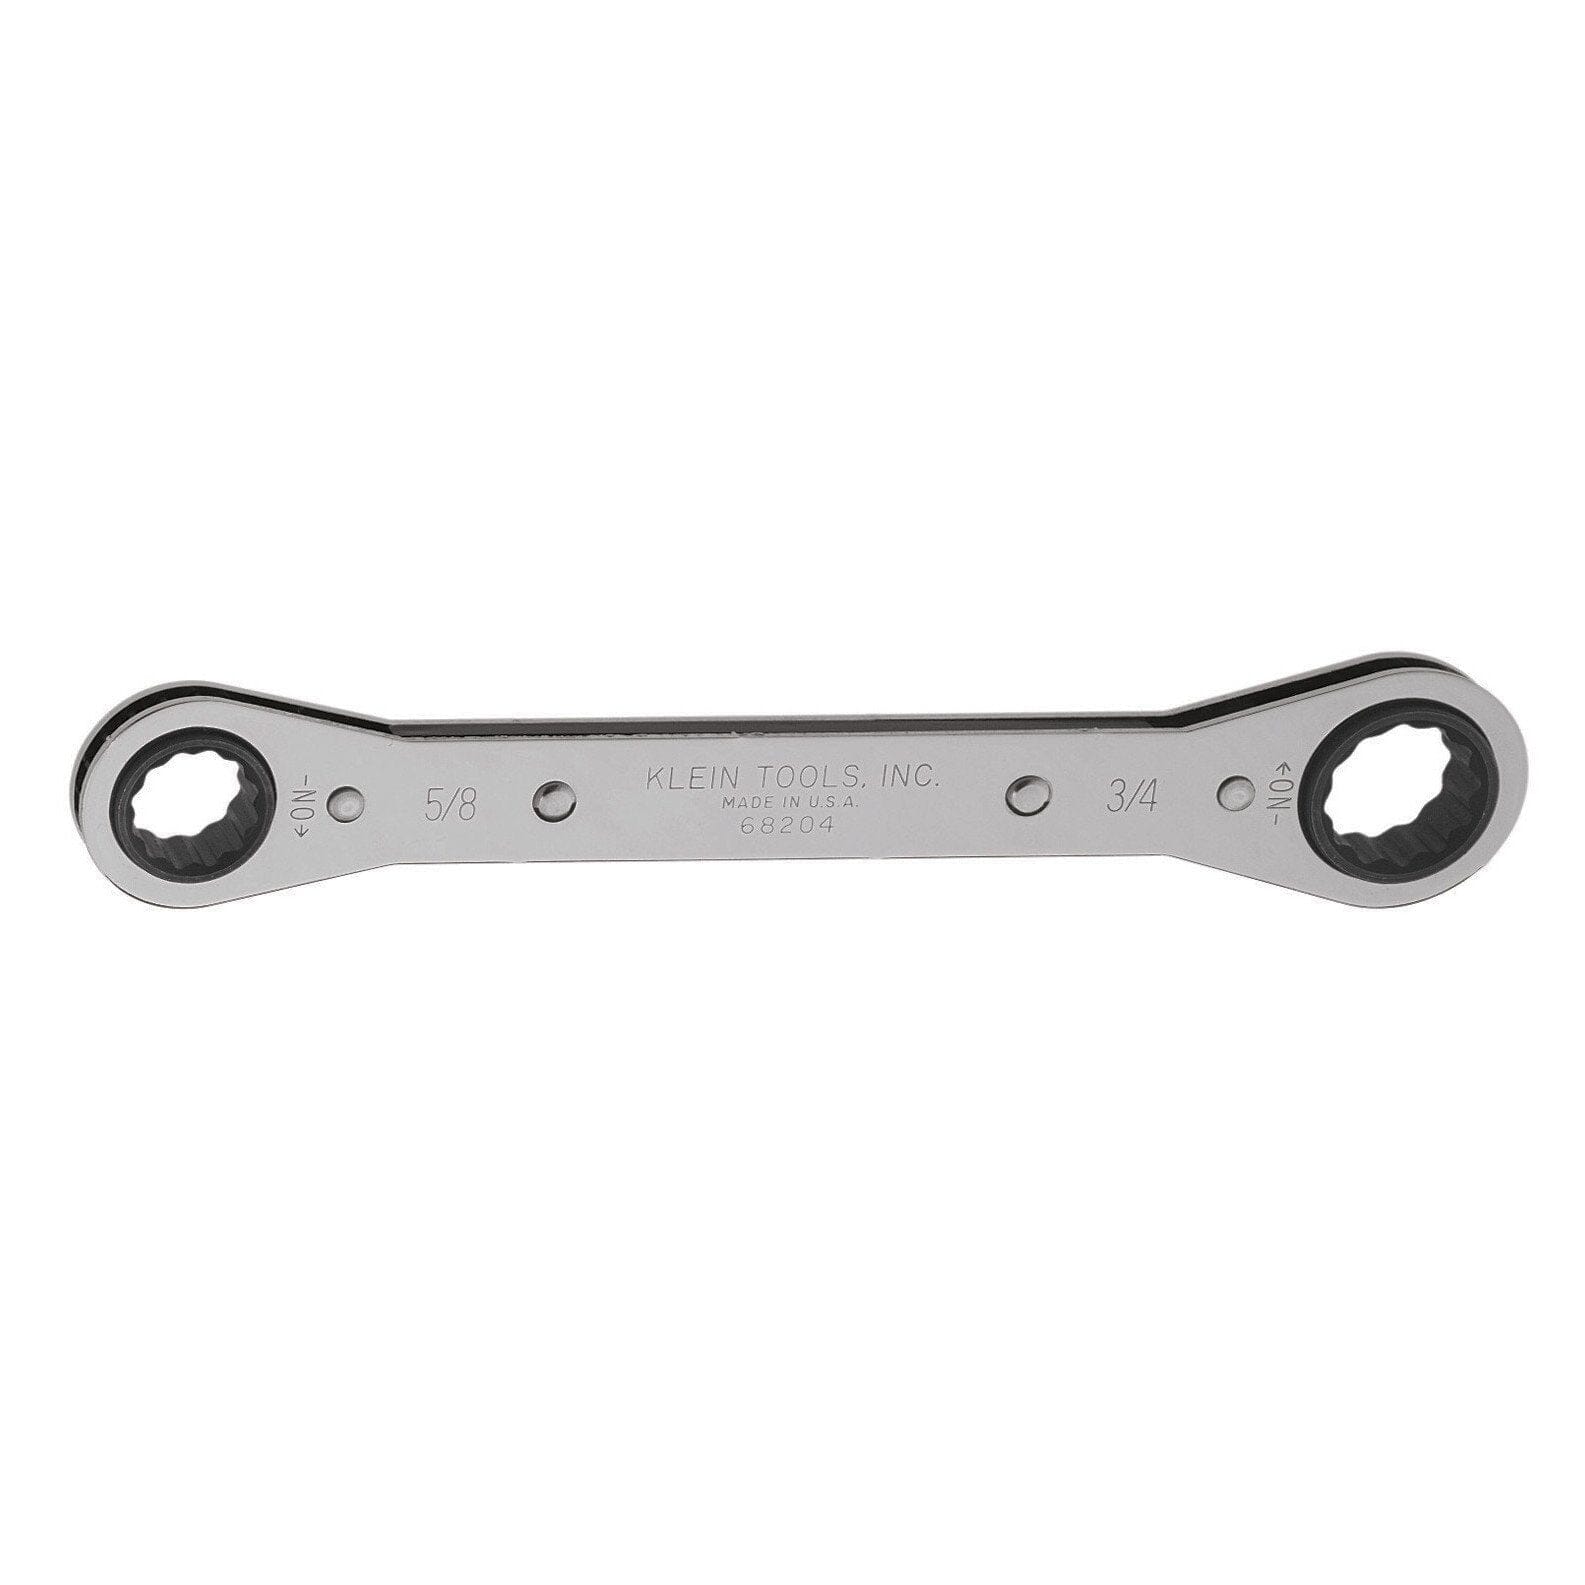 Klein Ratcheting Box Wrench 5/8 x 3/4-Inch - 68204 Wrenches Klein Tools 